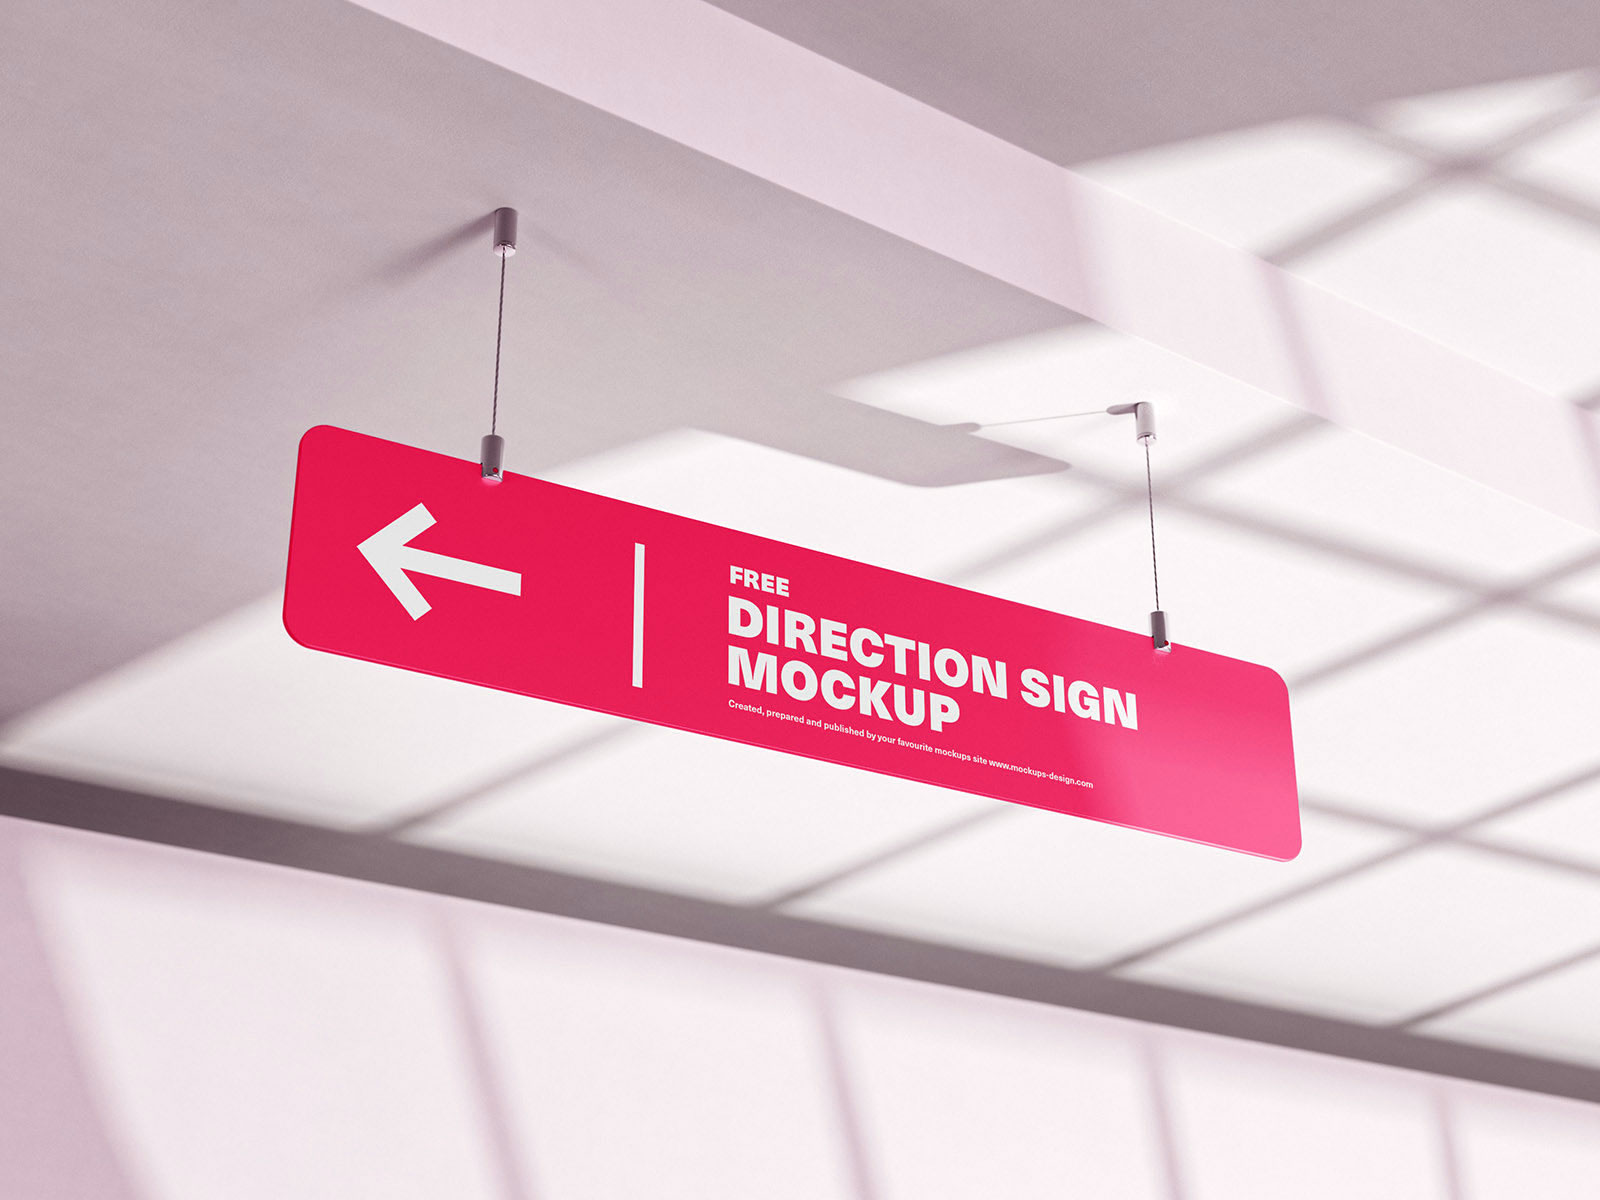 Indoor Direction Sign Mockup: Navigate with Style and Clarity